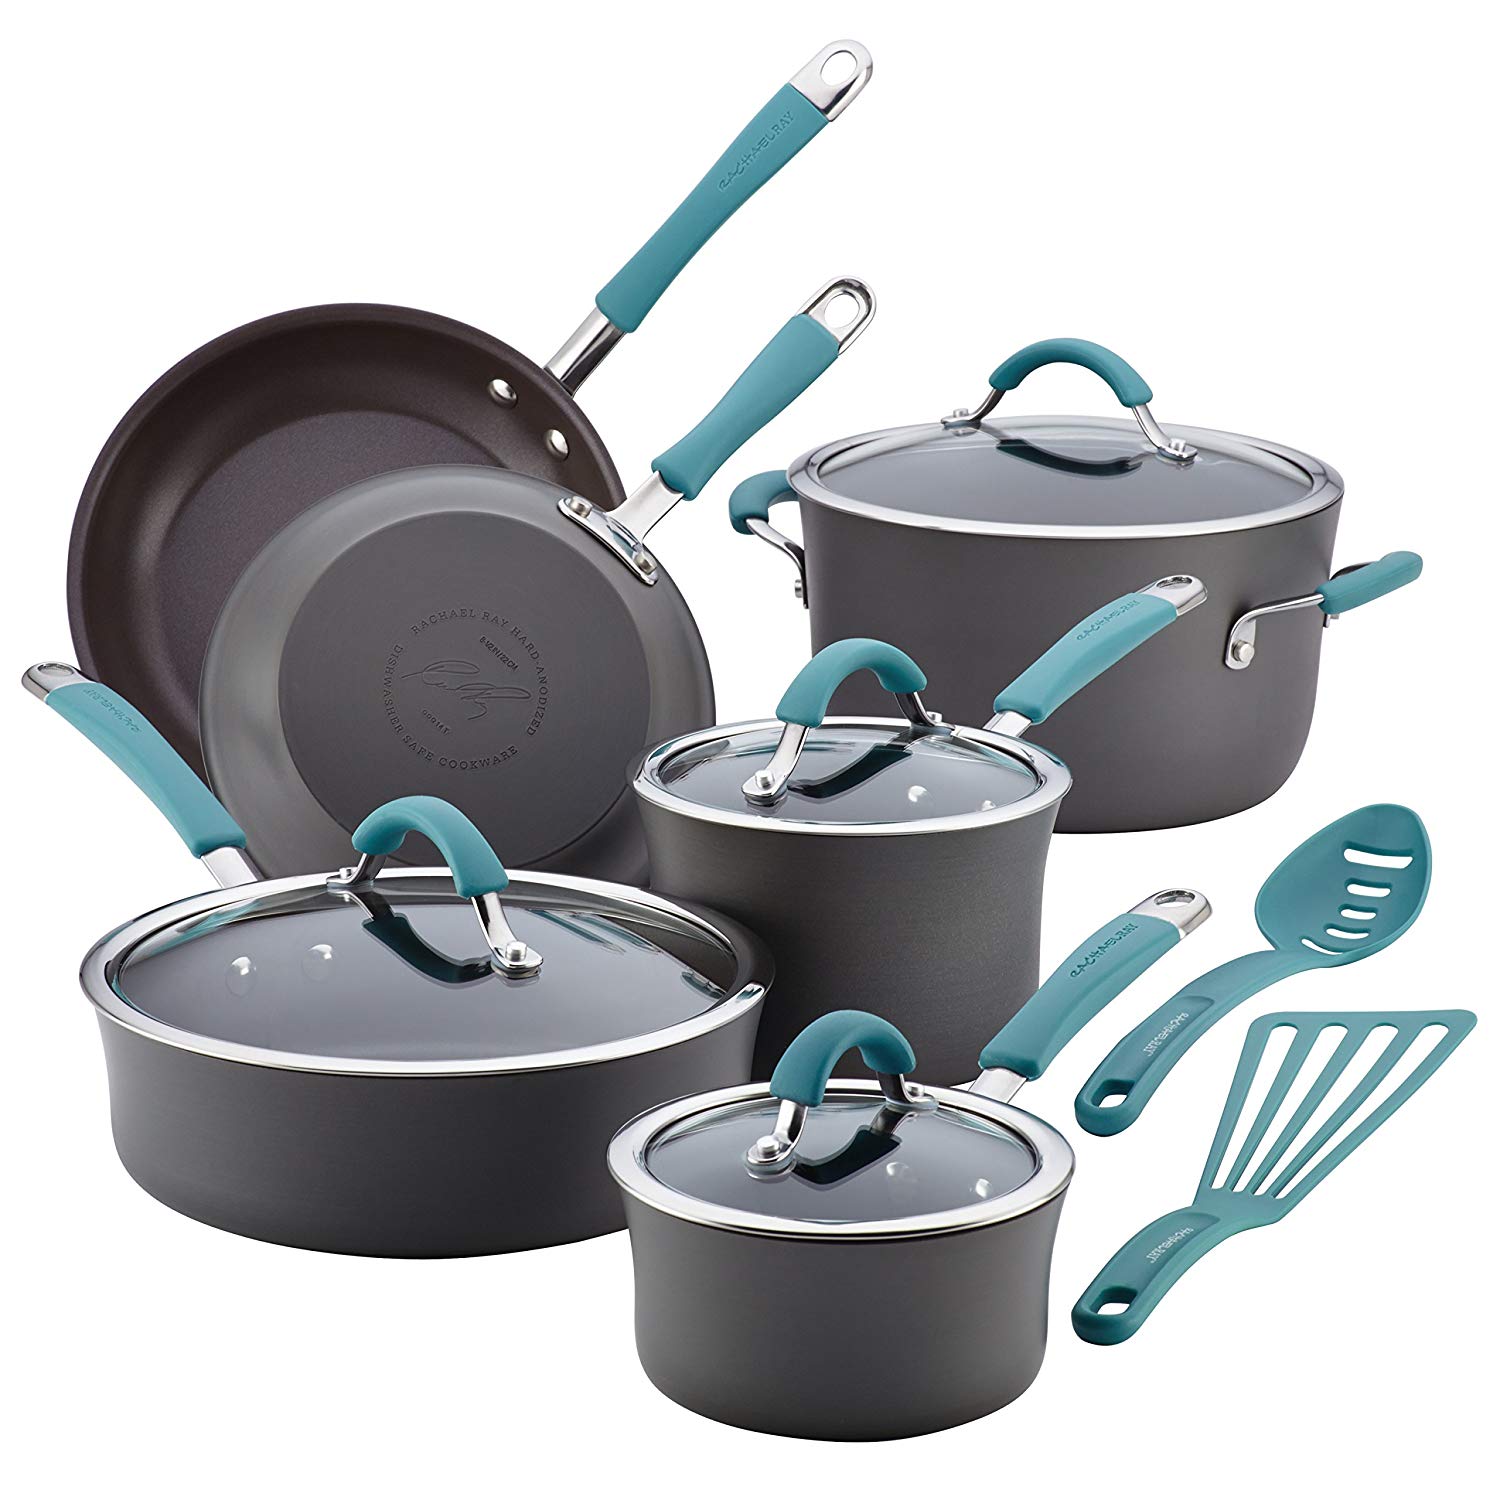 Rachael Ray 12-Piece Pots and Pans Cookware Set